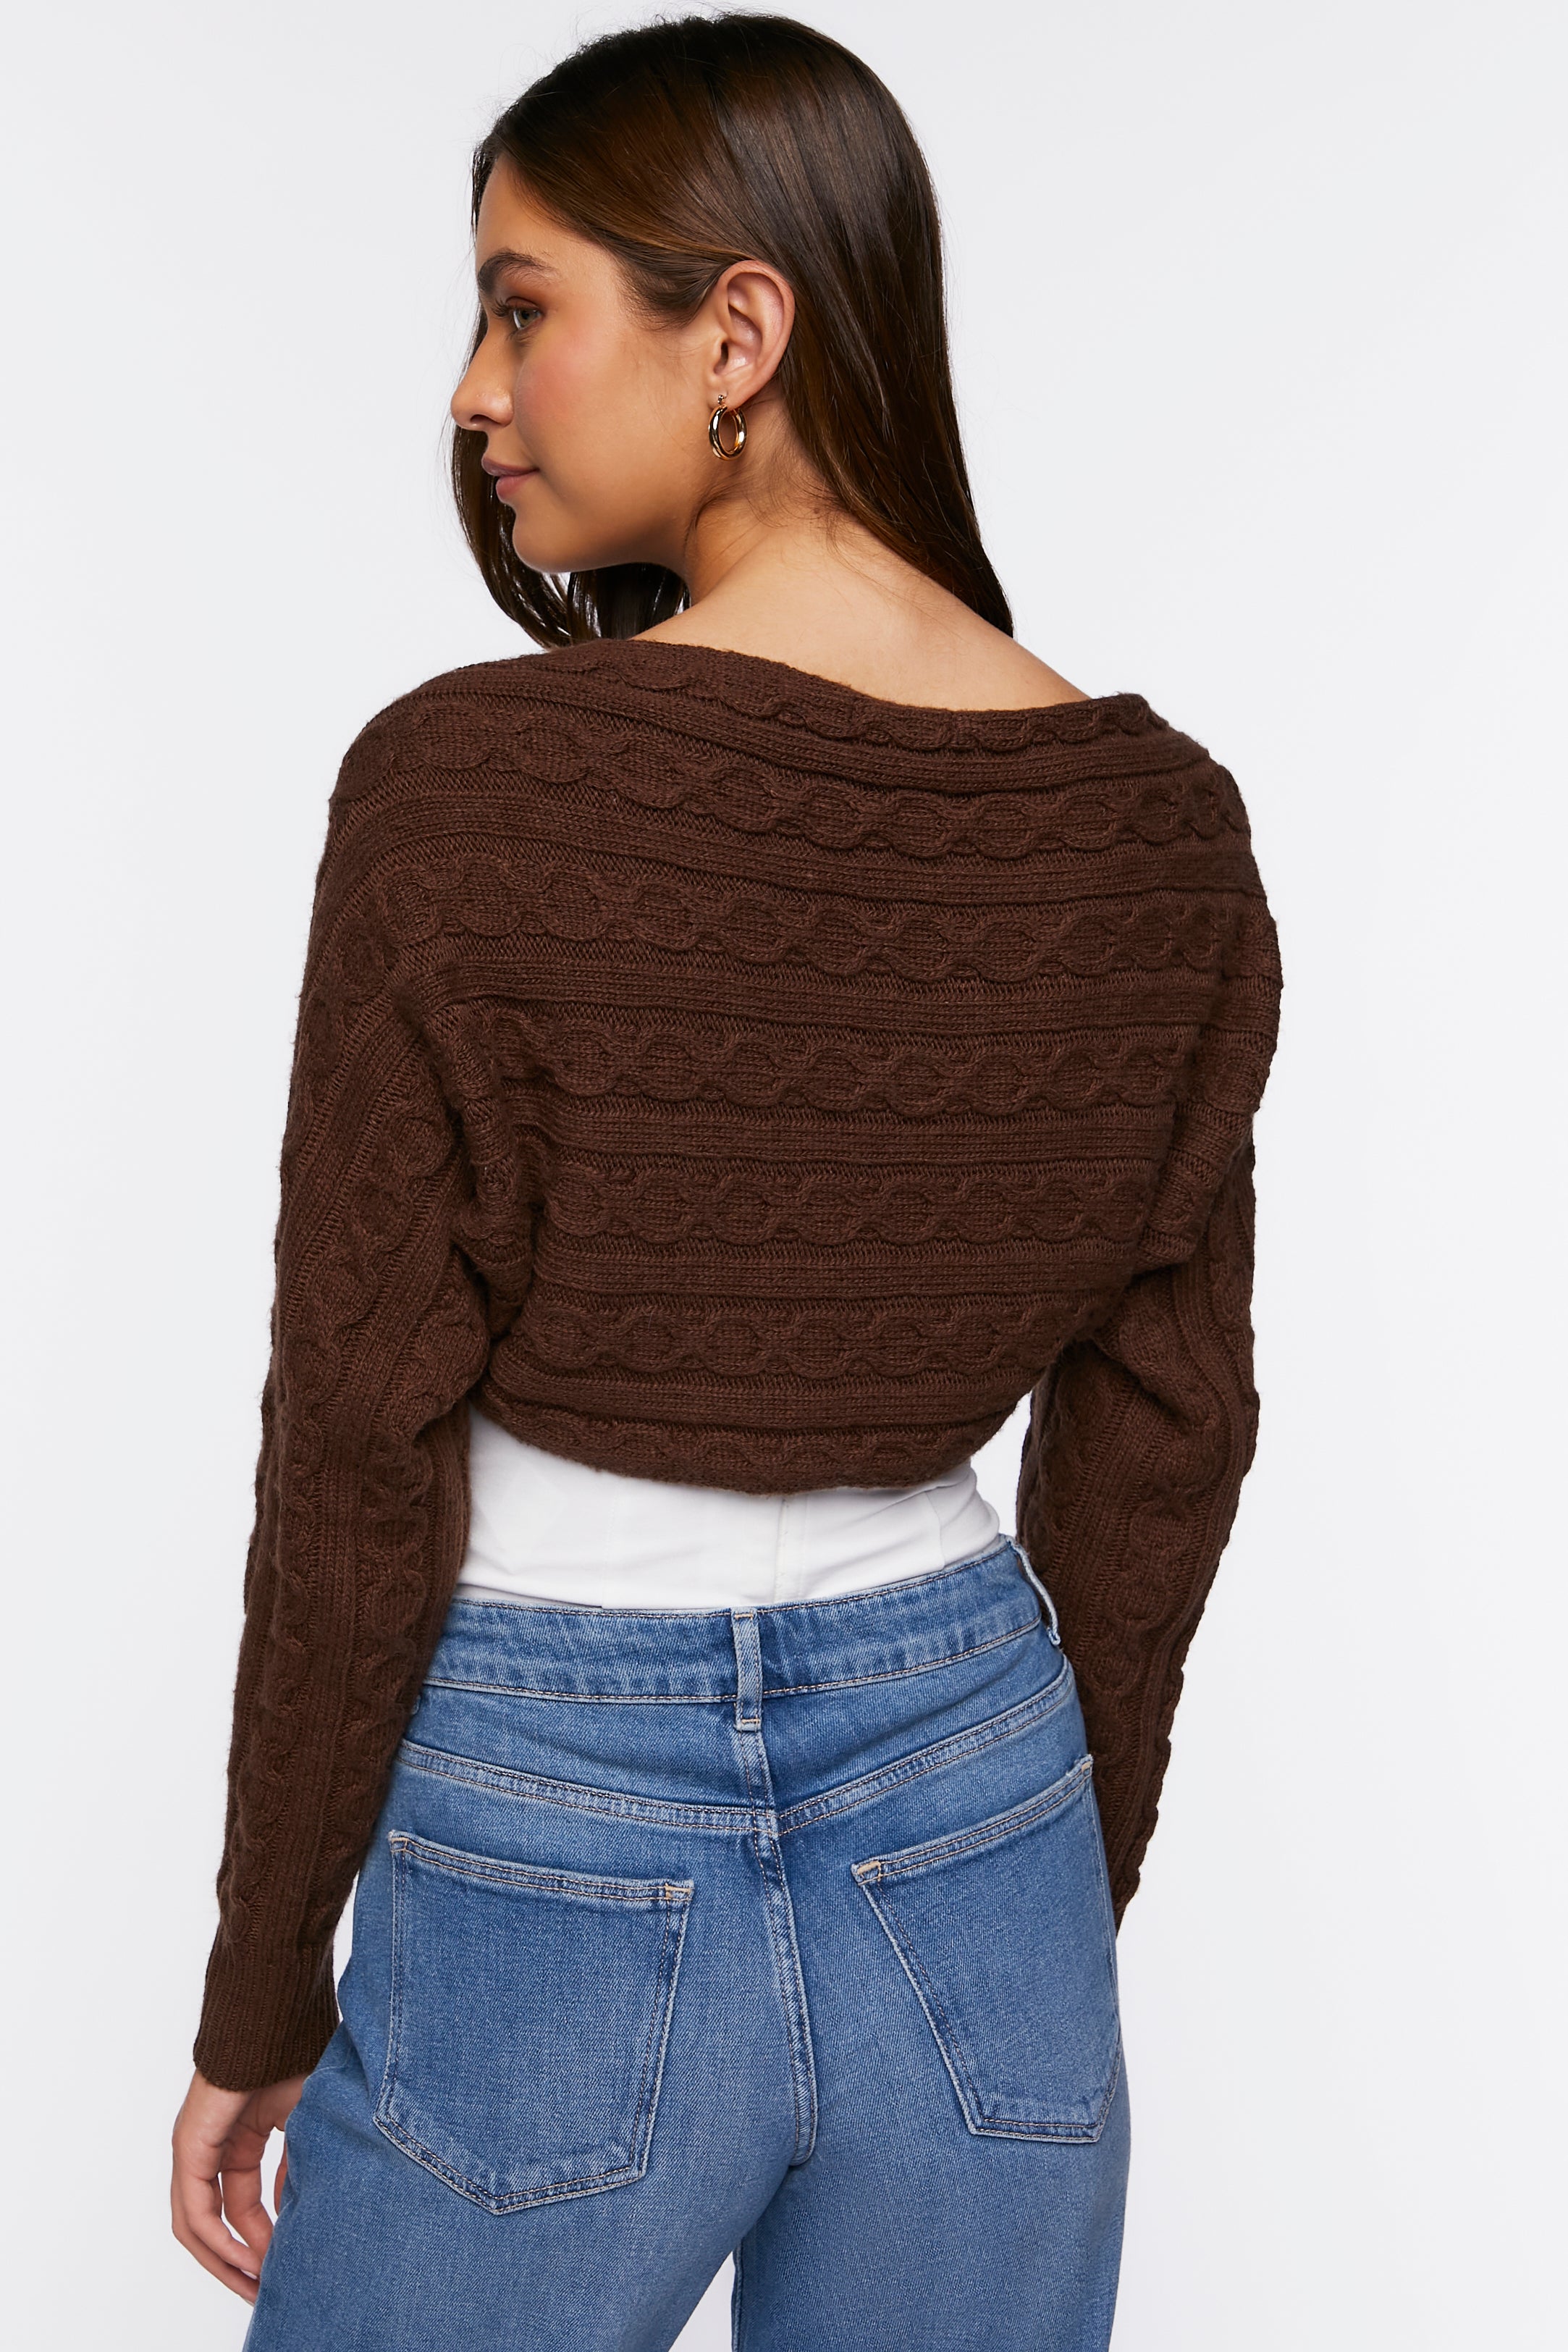 Brown Cable Knit Shrug Sweater 3